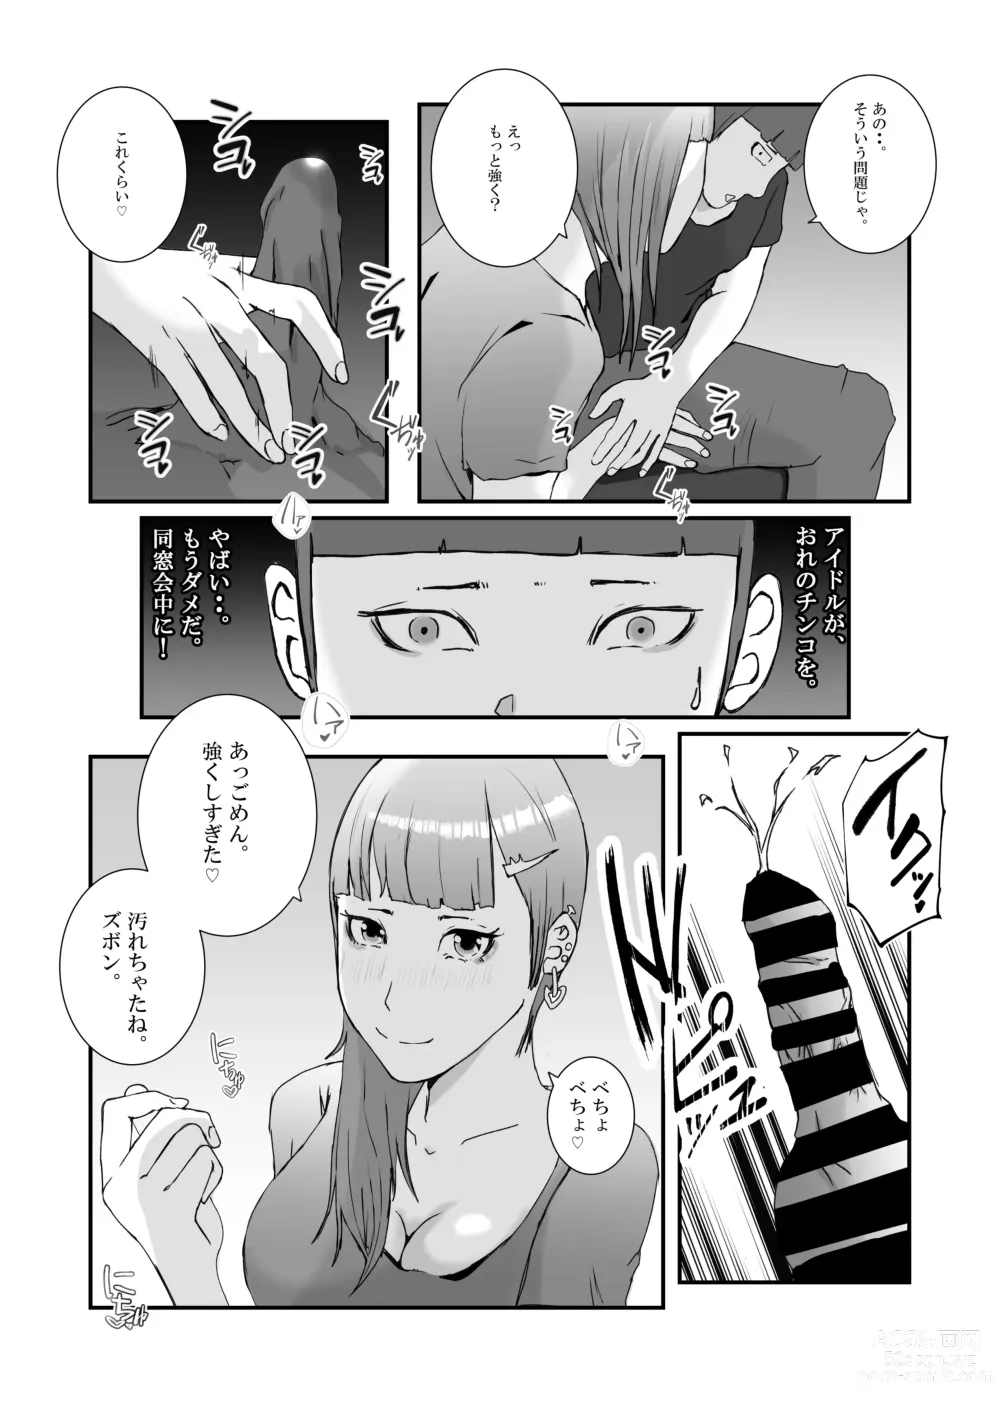 Page 14 of doujinshi Serious sex with a popular idol in the toilet during a class reunion. From cleaning blowjob to creampie..